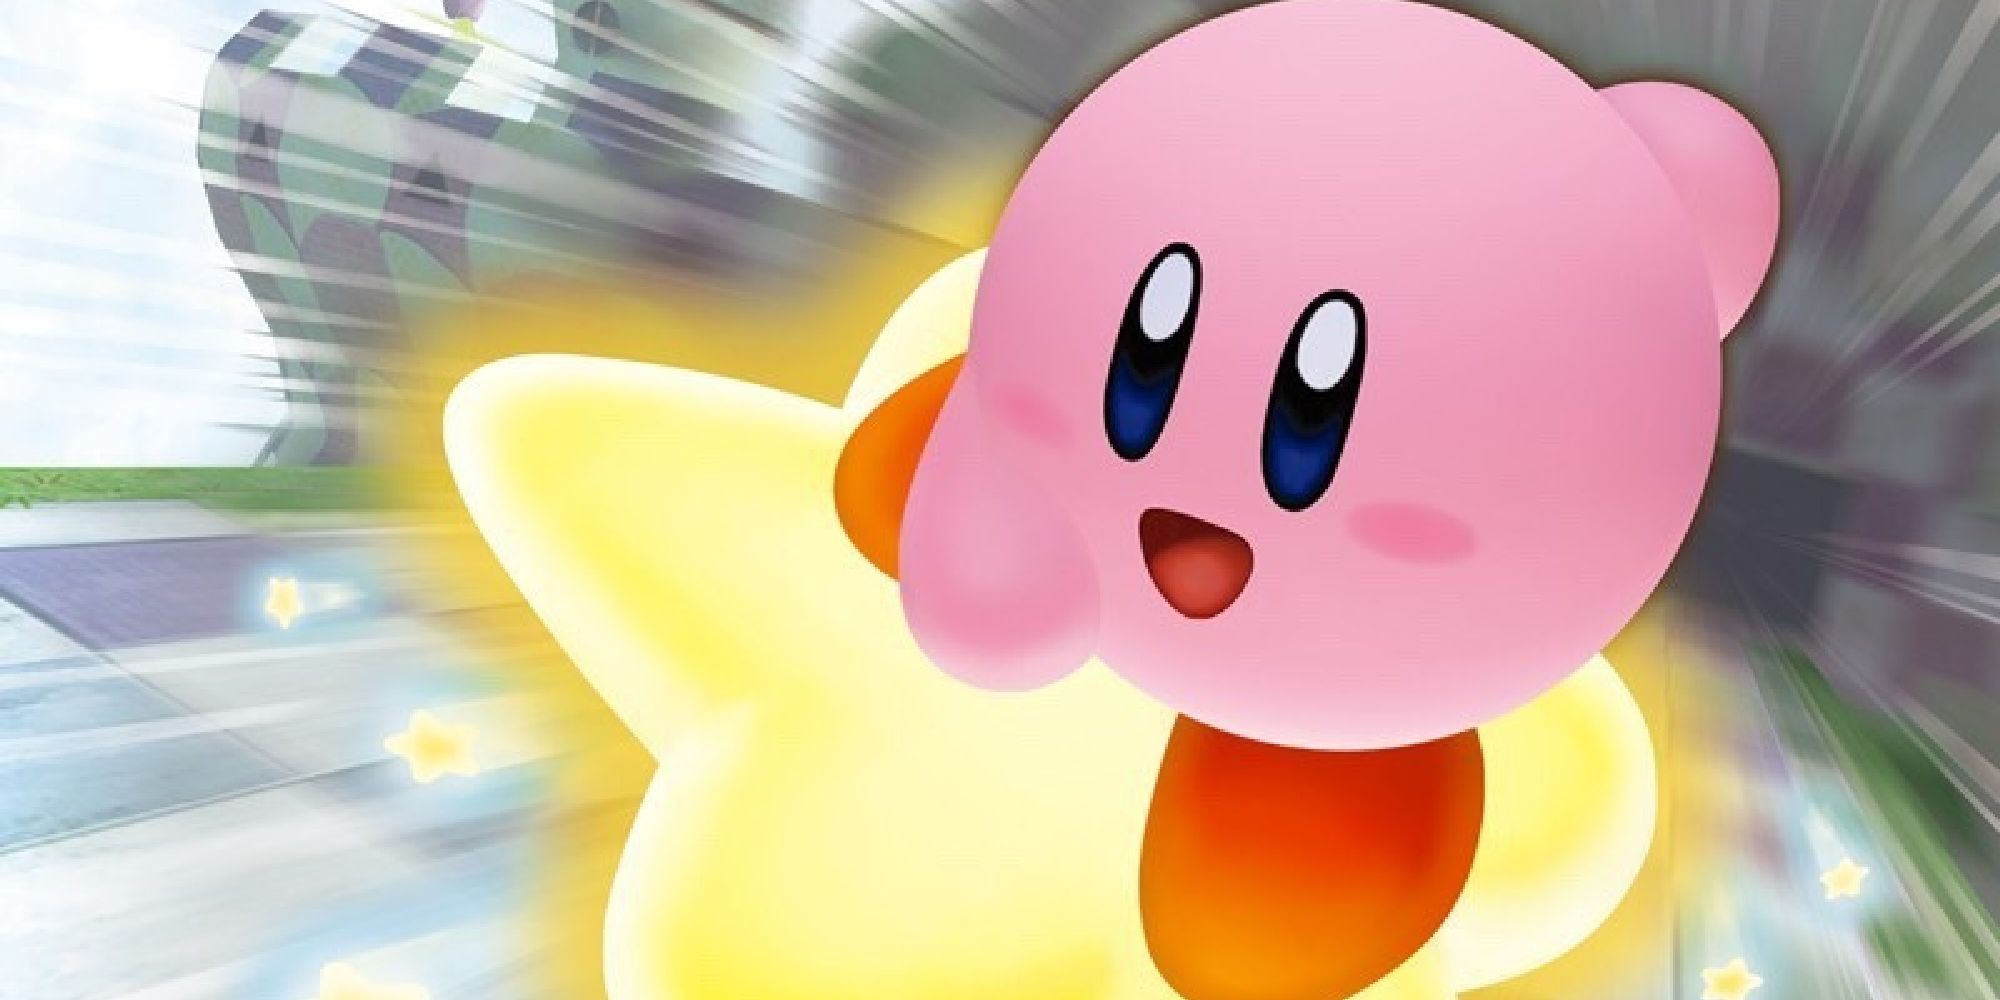 The Japanese art for Kirby's Air Ride, showing a smiling Kirby riding a warp star